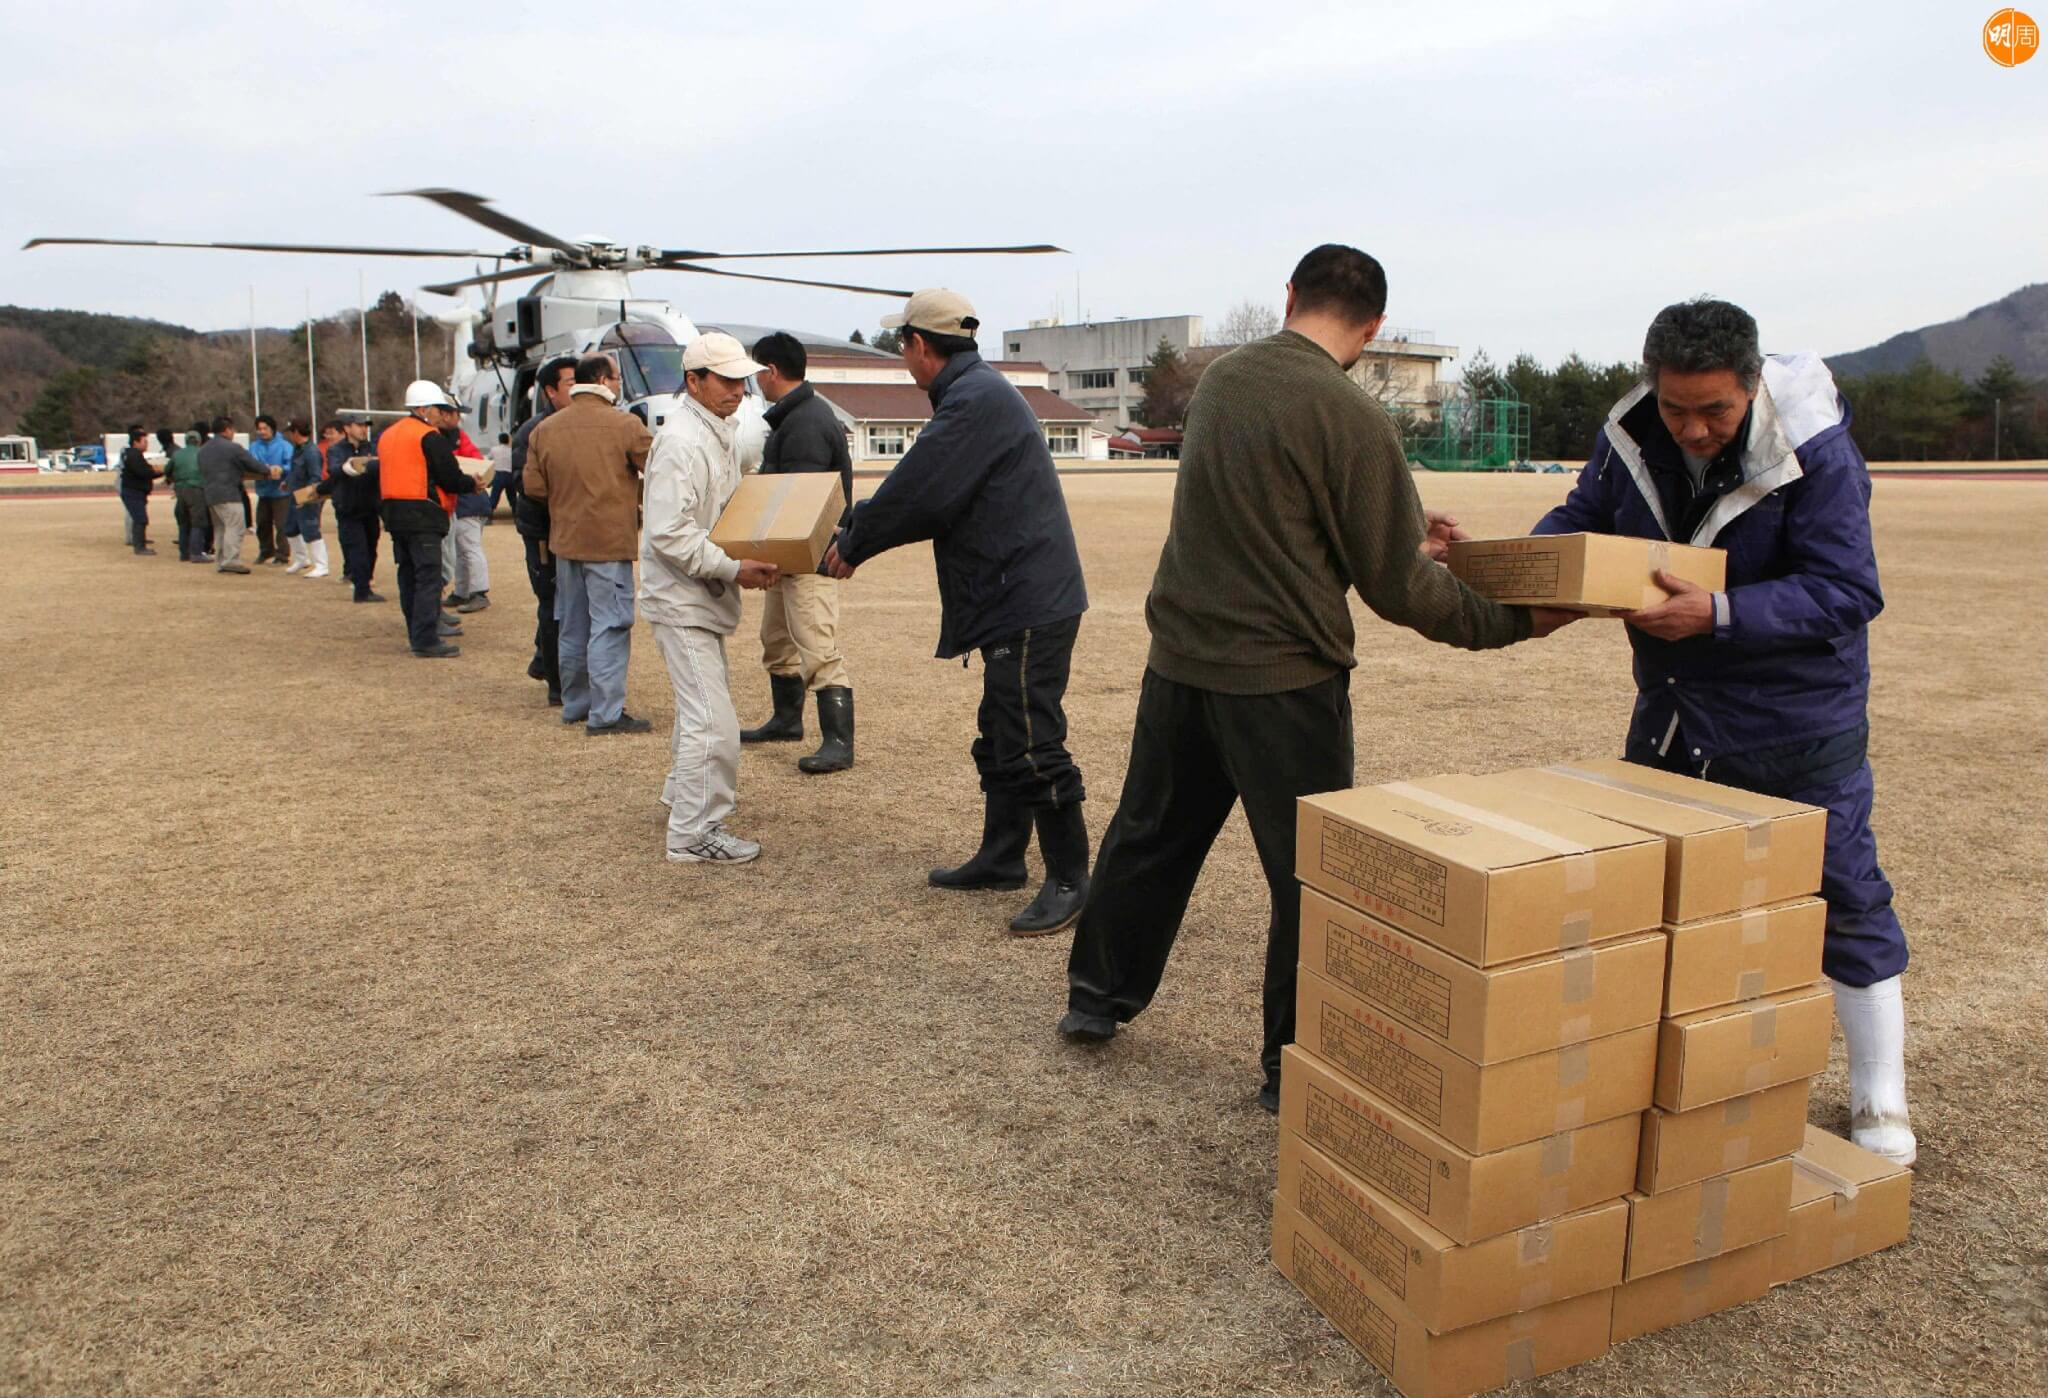 Local residents and town staff carry out relief supplies effects from a helicopter in the town of Onagawa in Miyagi prefecture on March 14, 2011 three days after a massive 8.9 magnitude earthquake and tsunami devastated the coast of eastern Japan. A new explosion at a nuclear plant in nearby Fukushima prefecture hit punch-drunk Japan on March 14 as it raced to avert a reactor meltdown after a quake-tsunami disaster that is feared to have killed more than 10,000 people. AFP PHOTO / JIJI PRESS (Photo by JIJI PRESS / JIJI PRESS / AFP) / Japan OUT